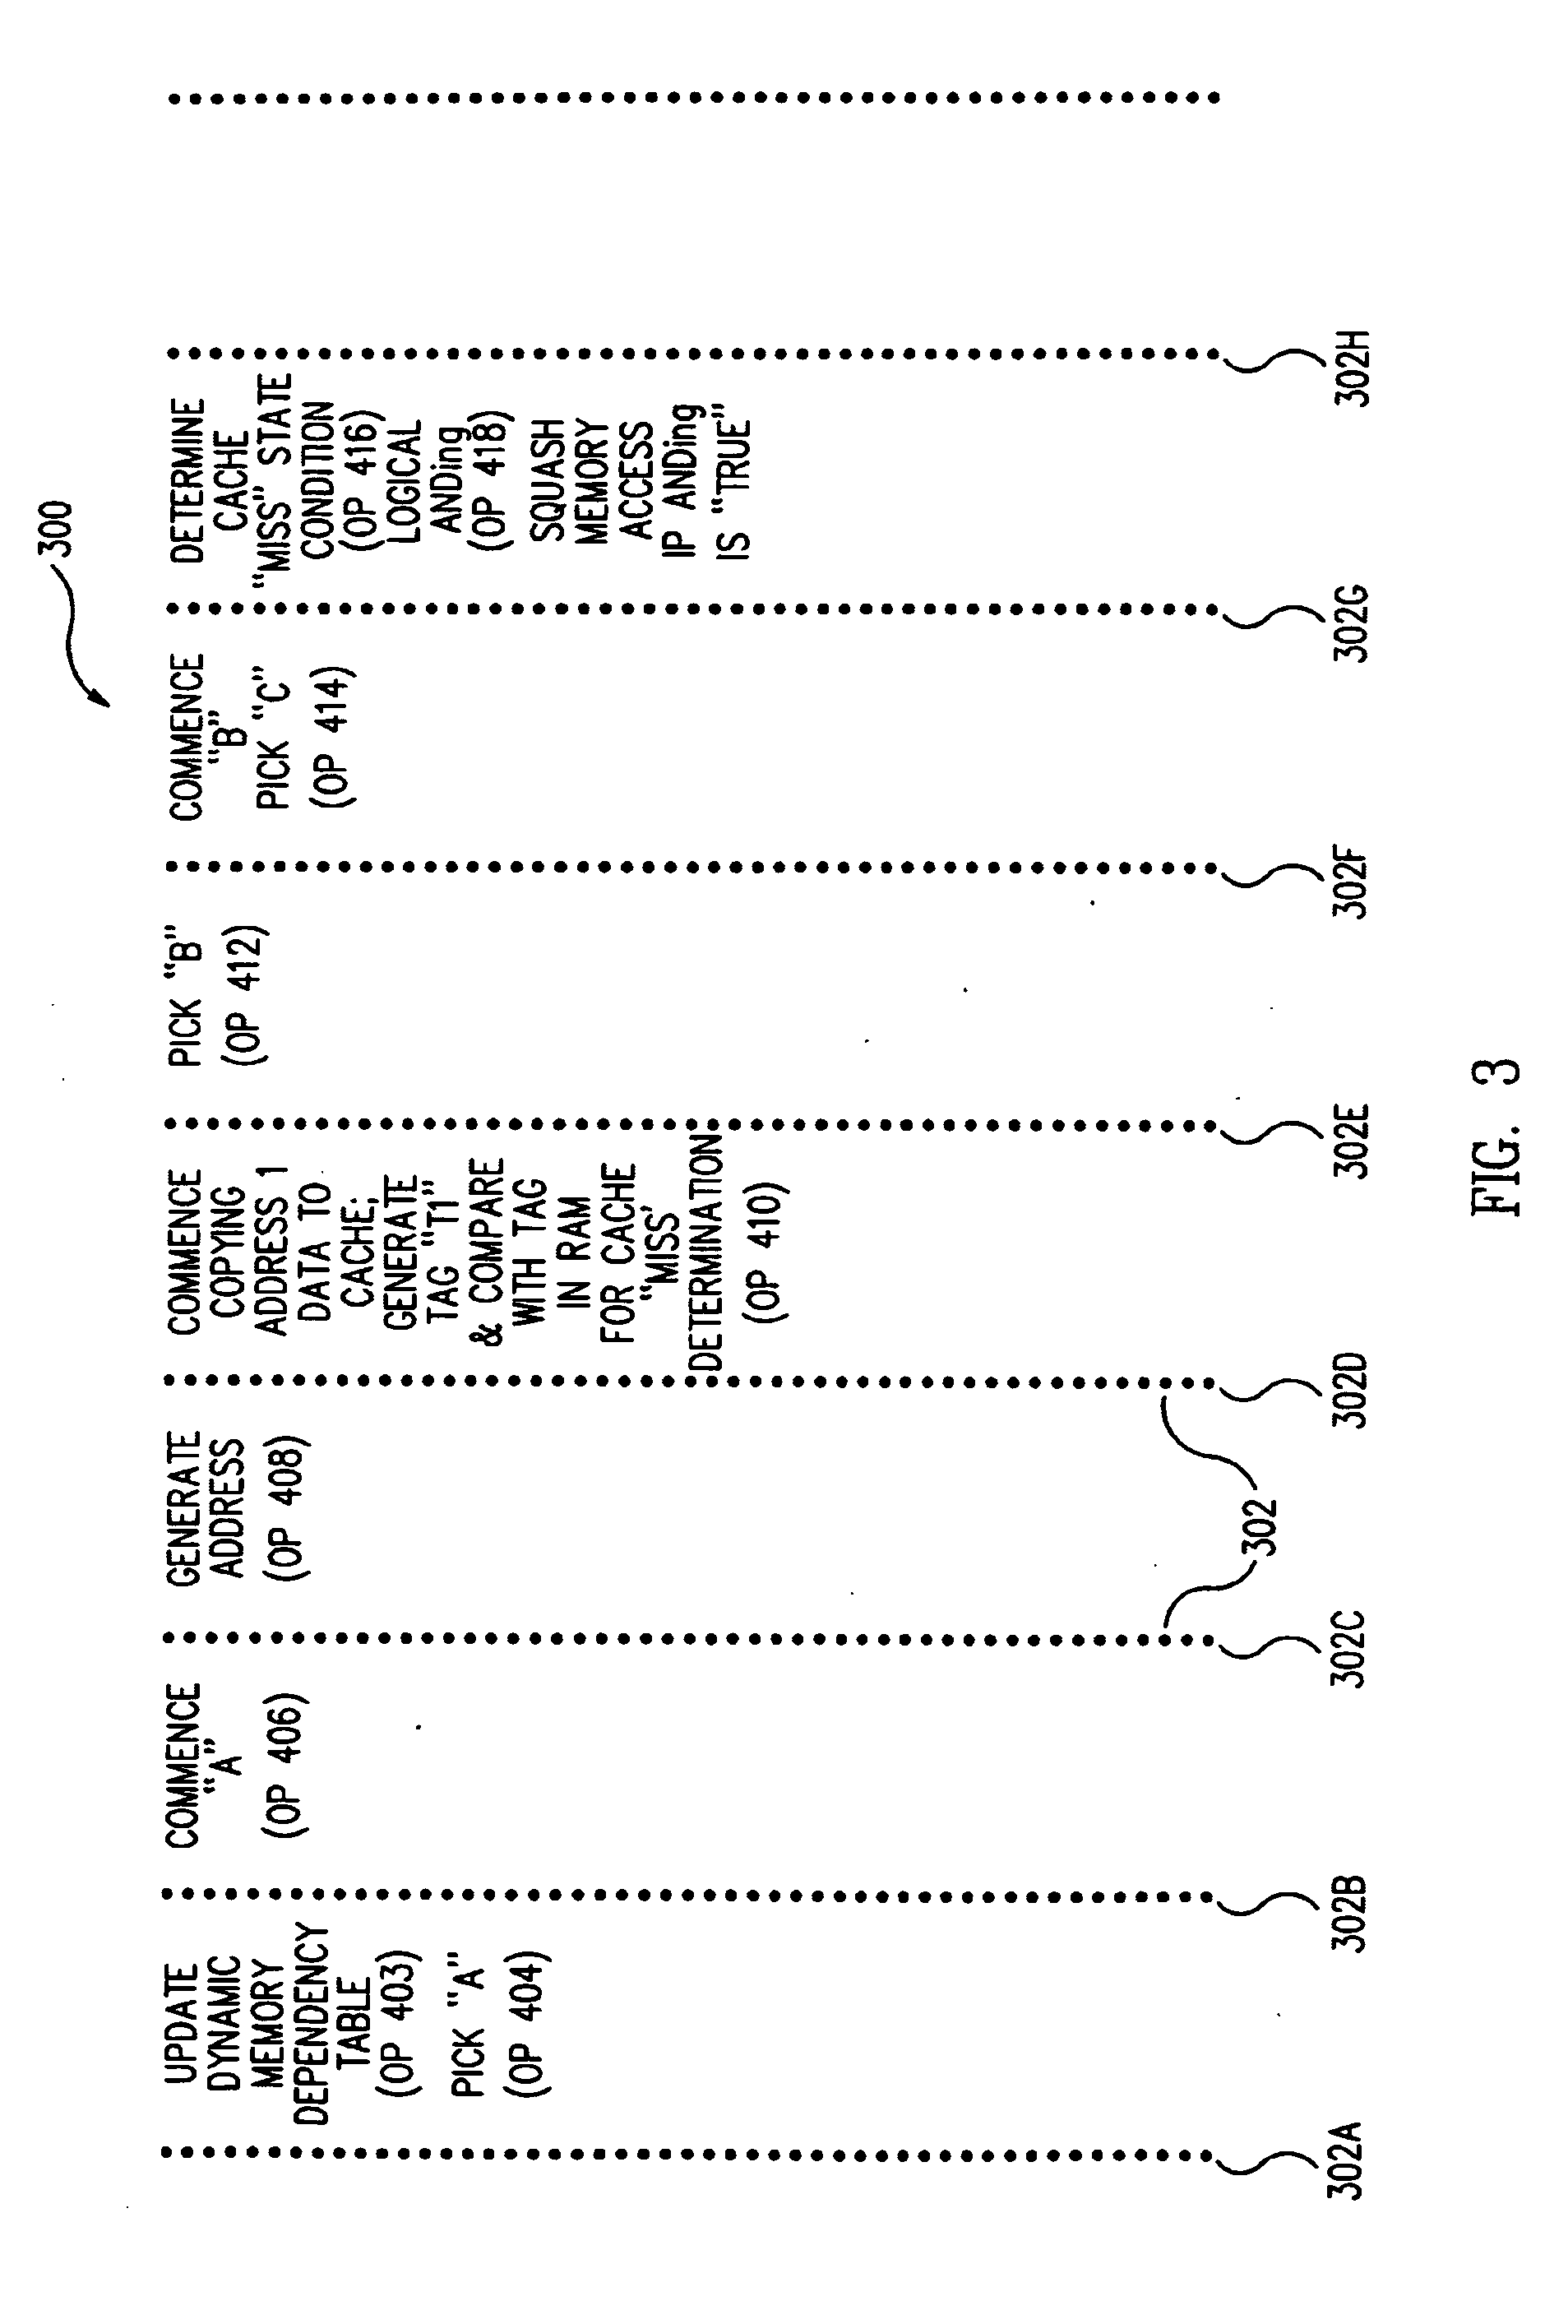 Method and apparatus for avoiding cache pollution due to speculative memory load operations in a microprocessor